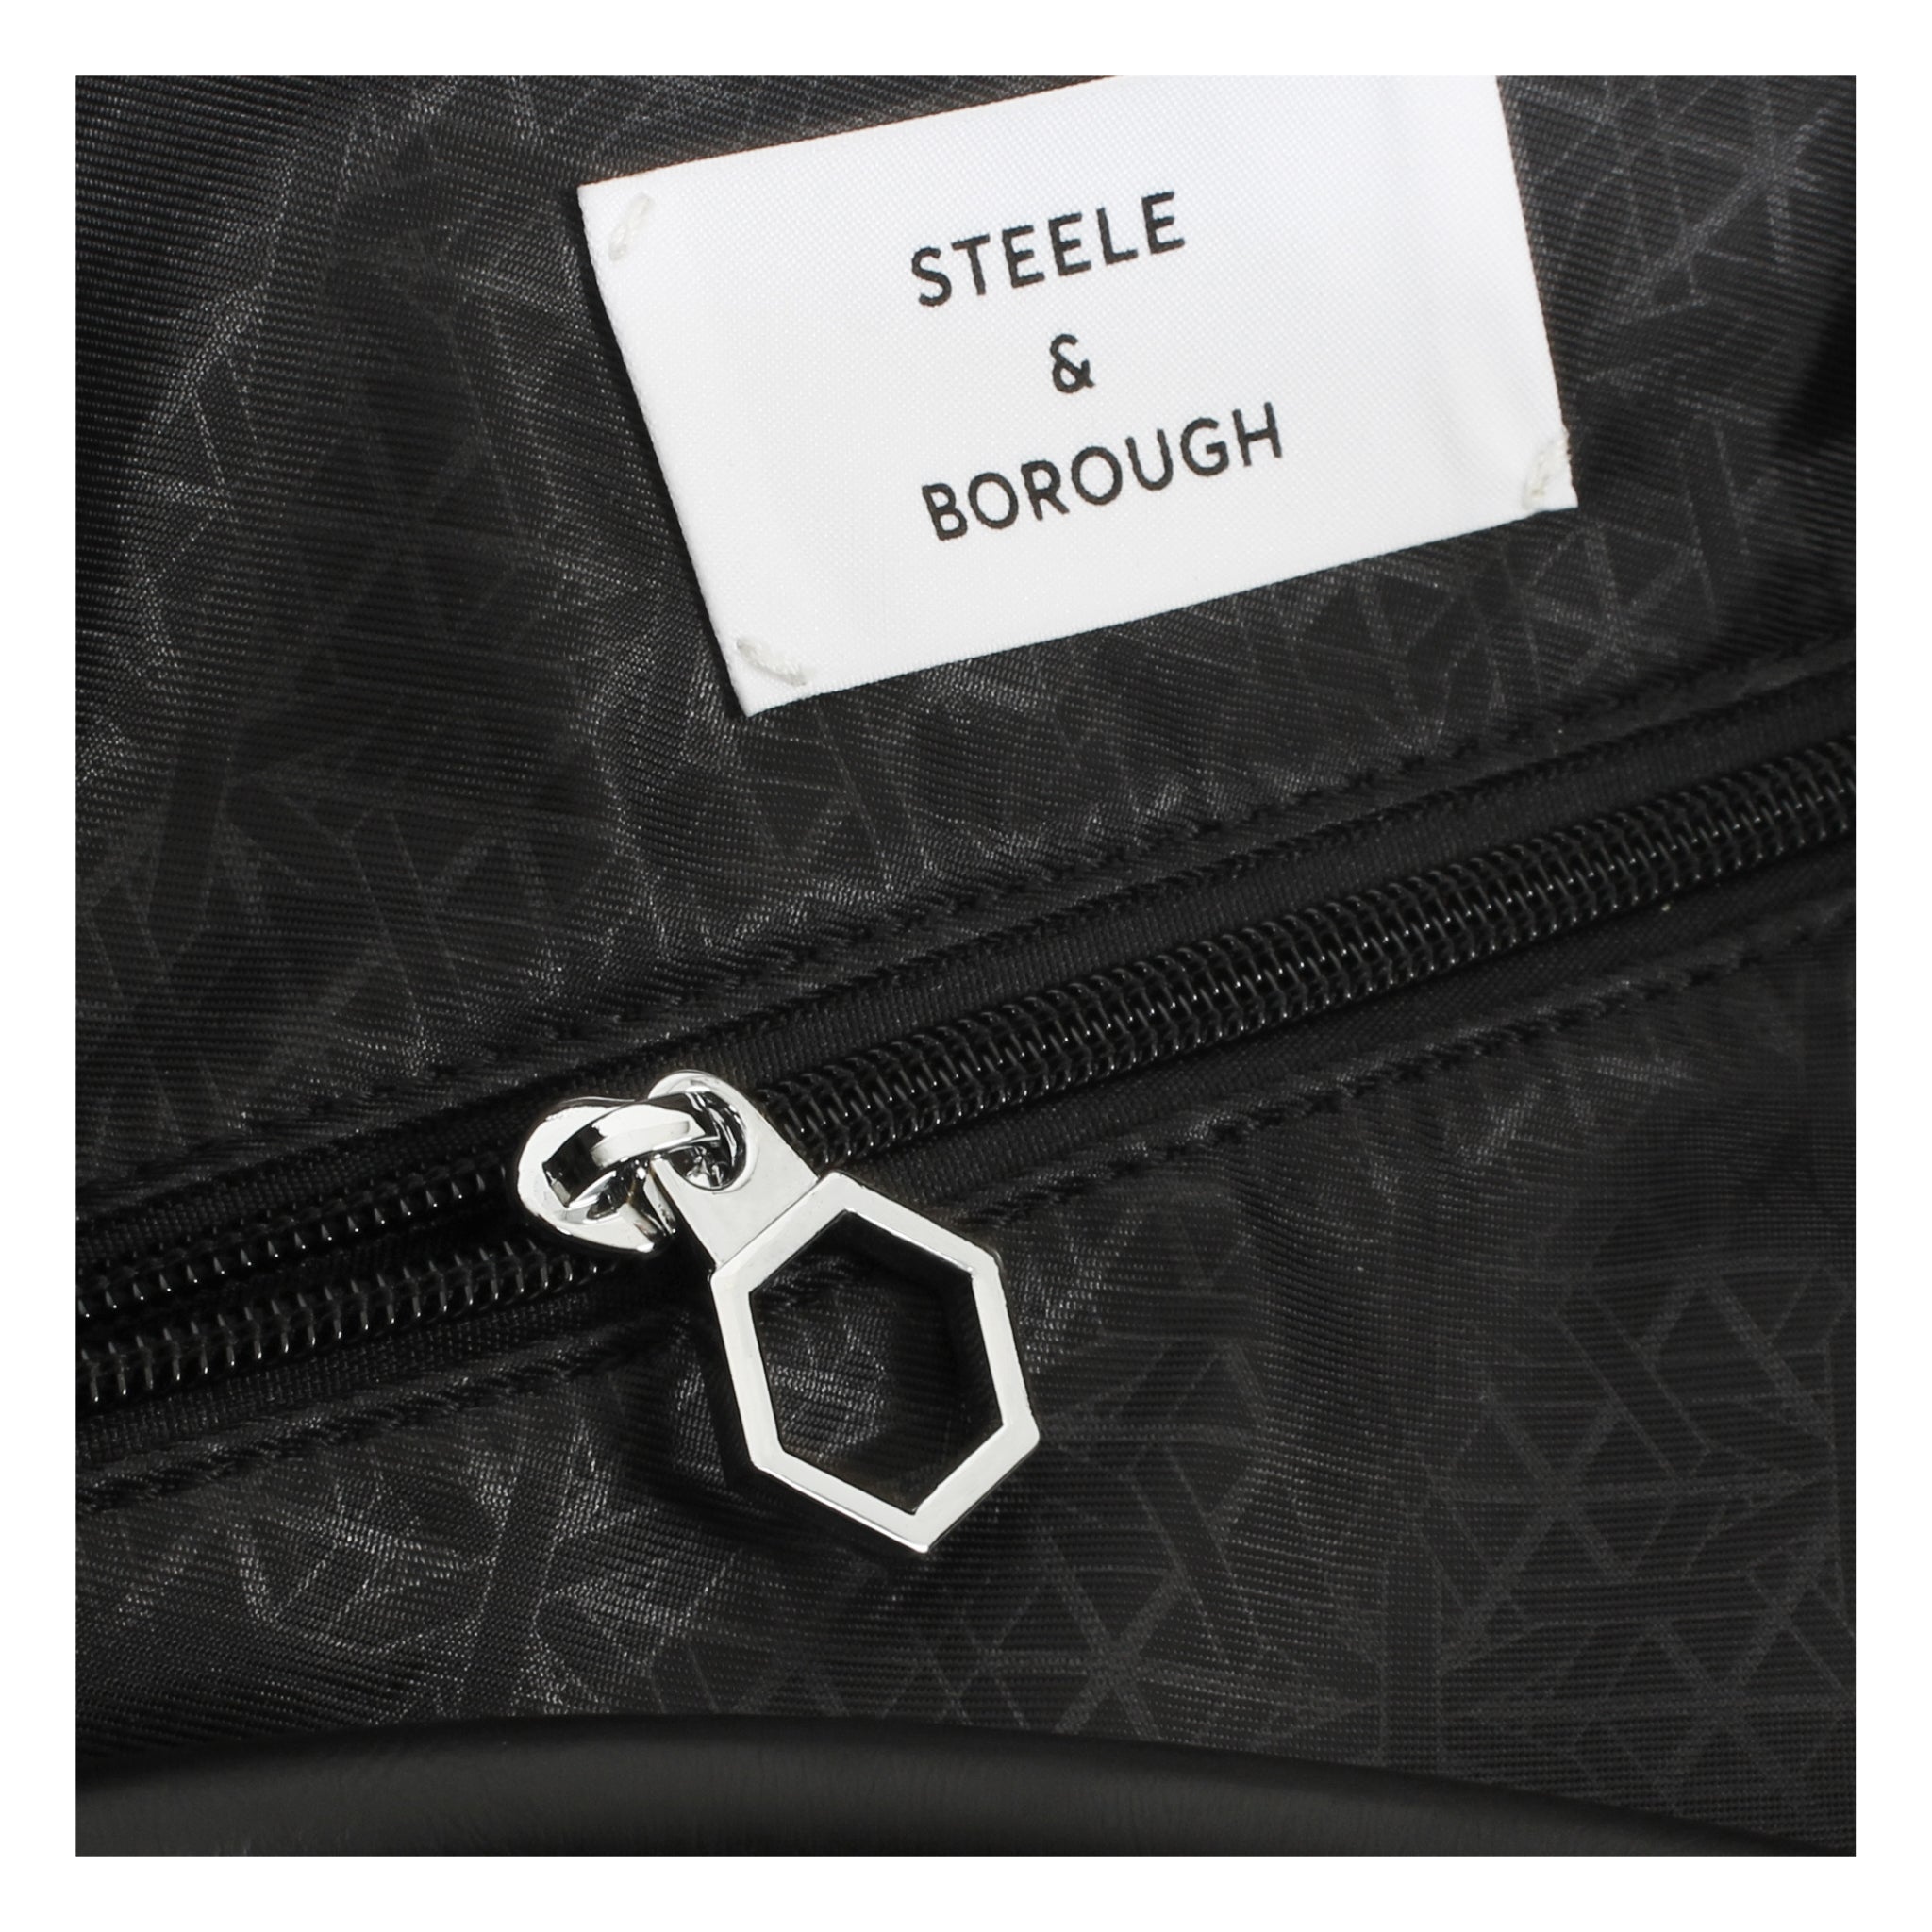 Close-up of the black Weekend Bag's zipper detail, featuring the branded pull and durable stitching.